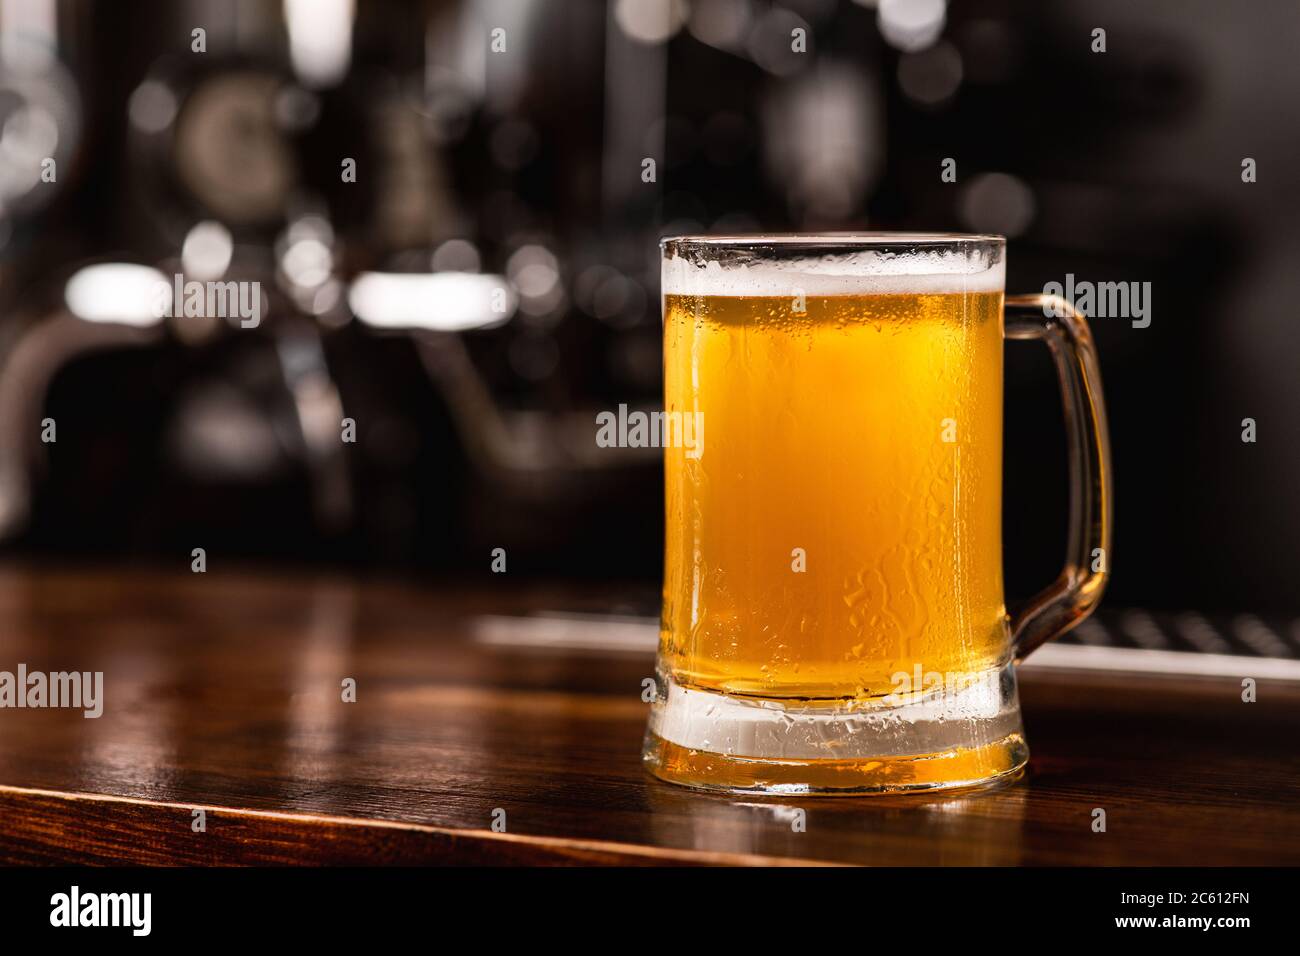 Favorite fresh beer from keg. Mug of light ale on wooden bar counter on blurred background Stock Photo